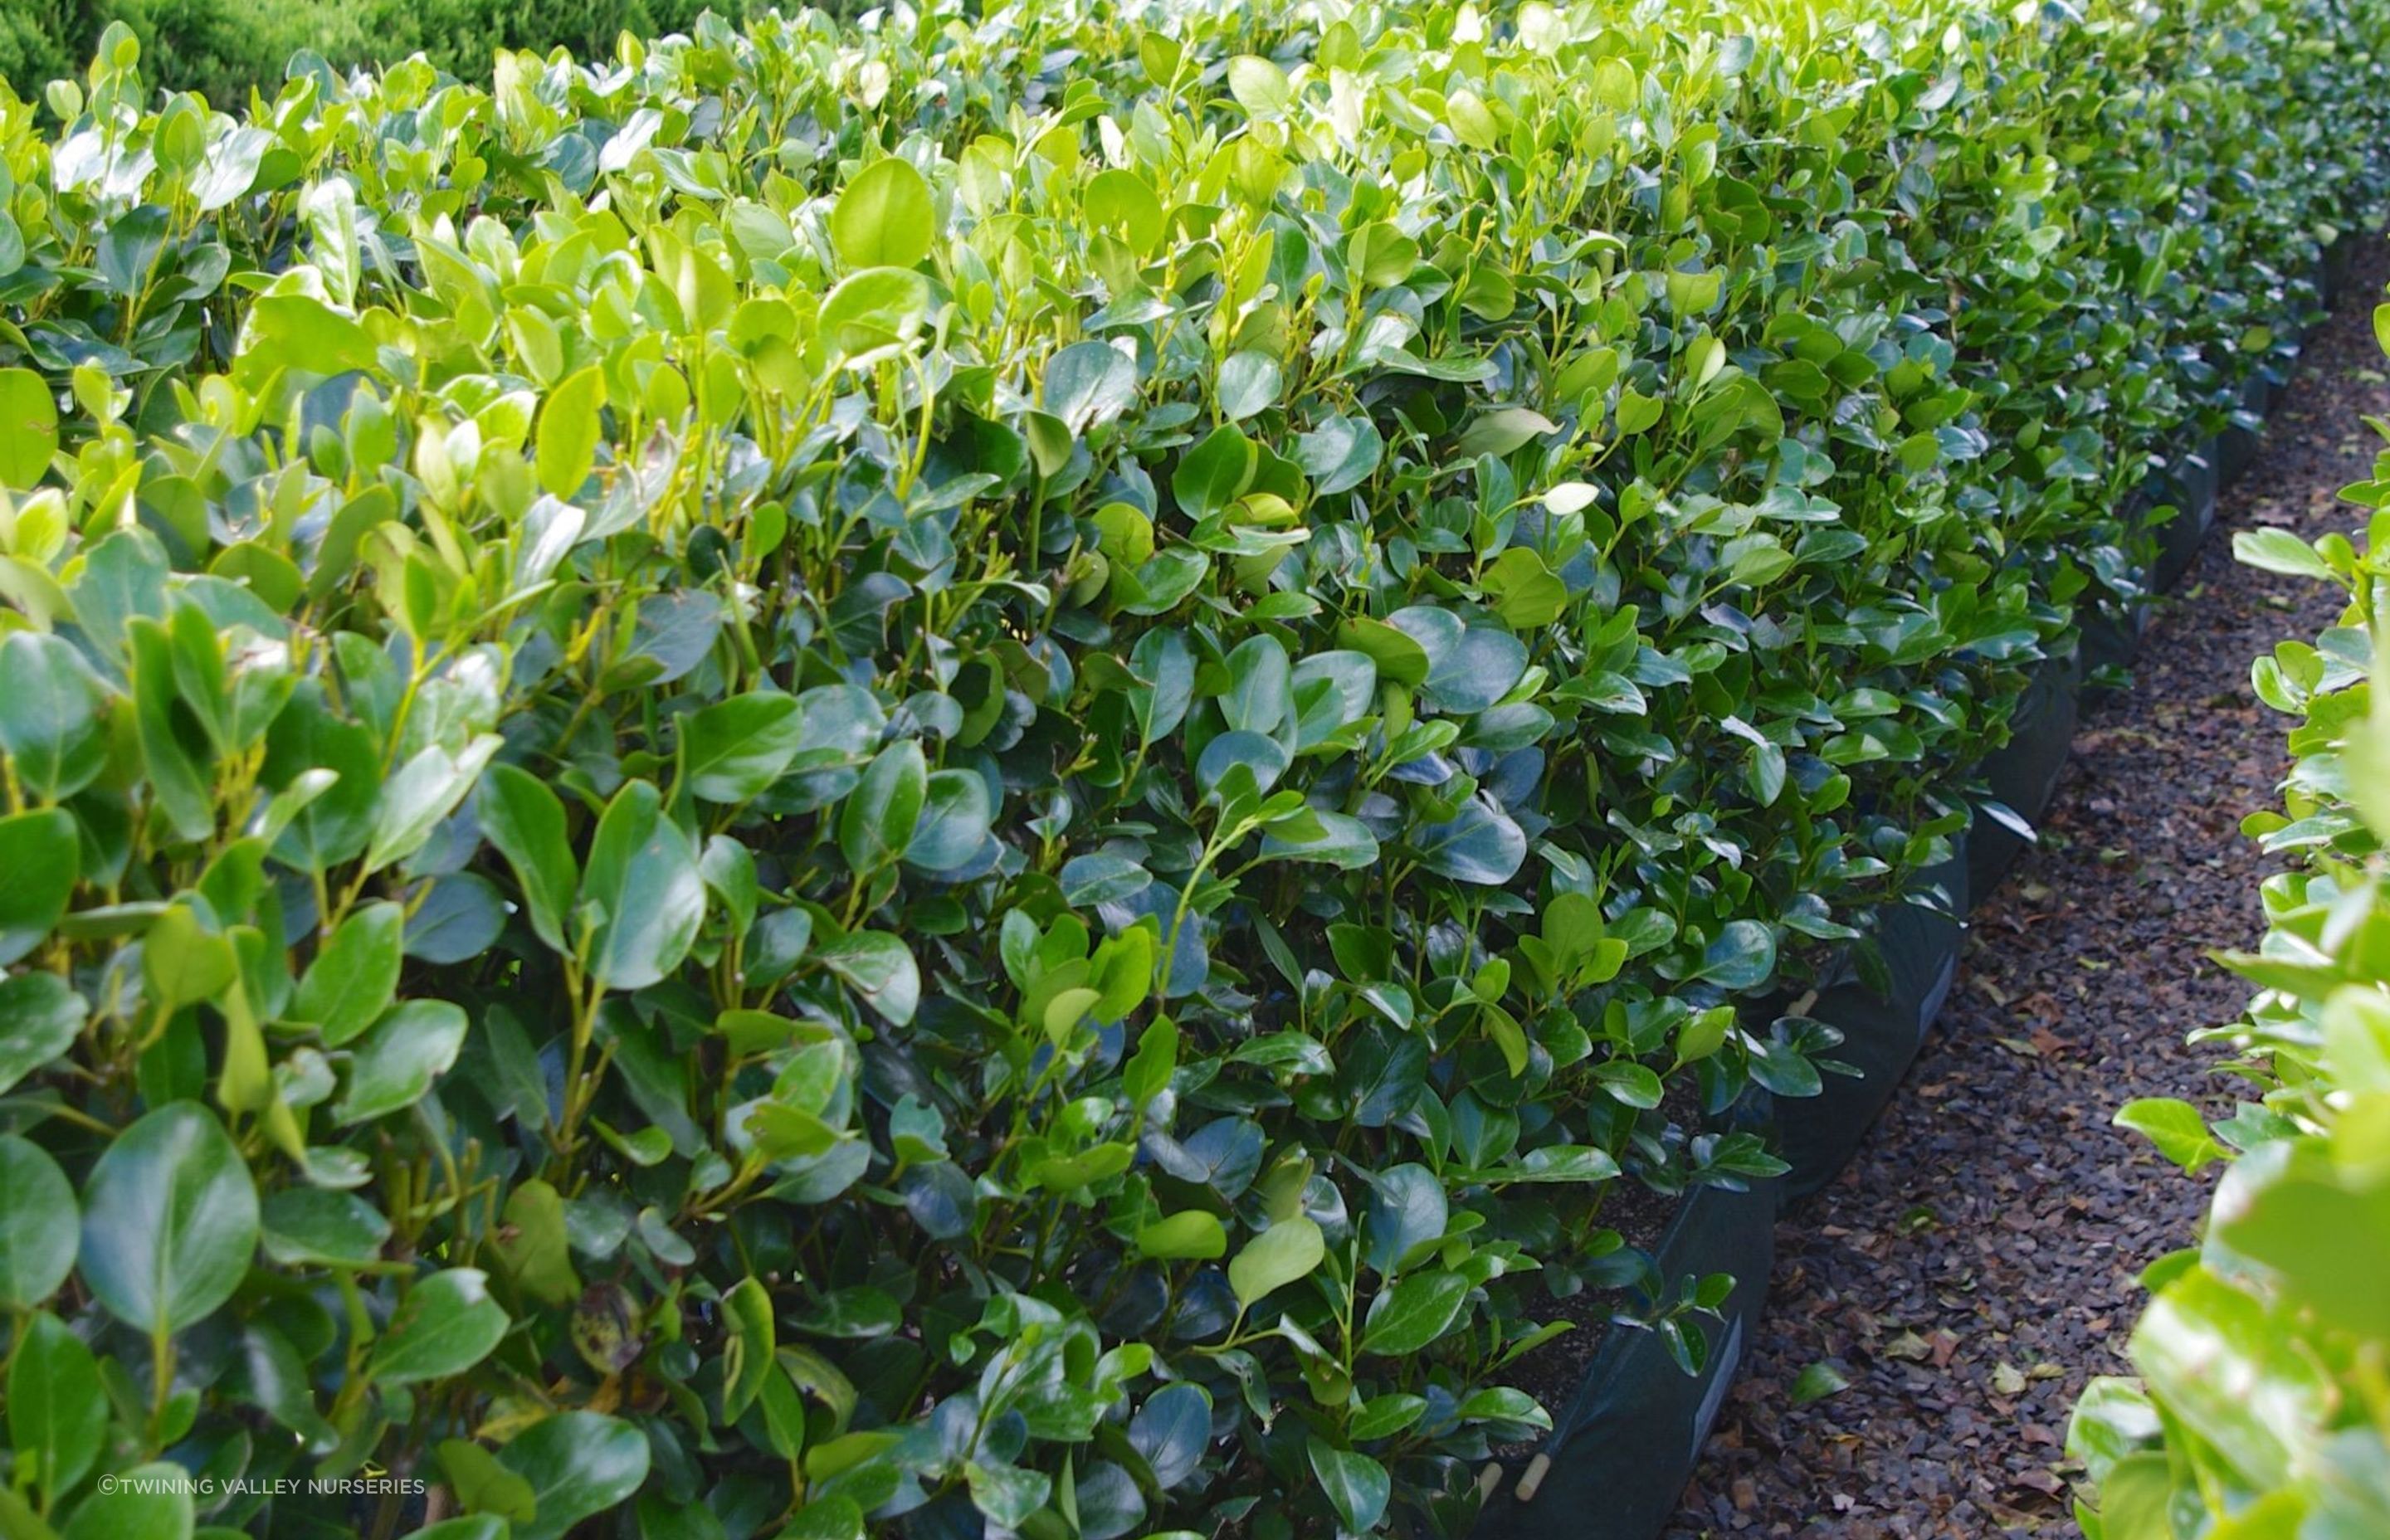 The Griselinia littoralis 'Ardmore Emerald' has stunning dark green foliage that contrasts beautifully with brighter, fresh growth in the spring.